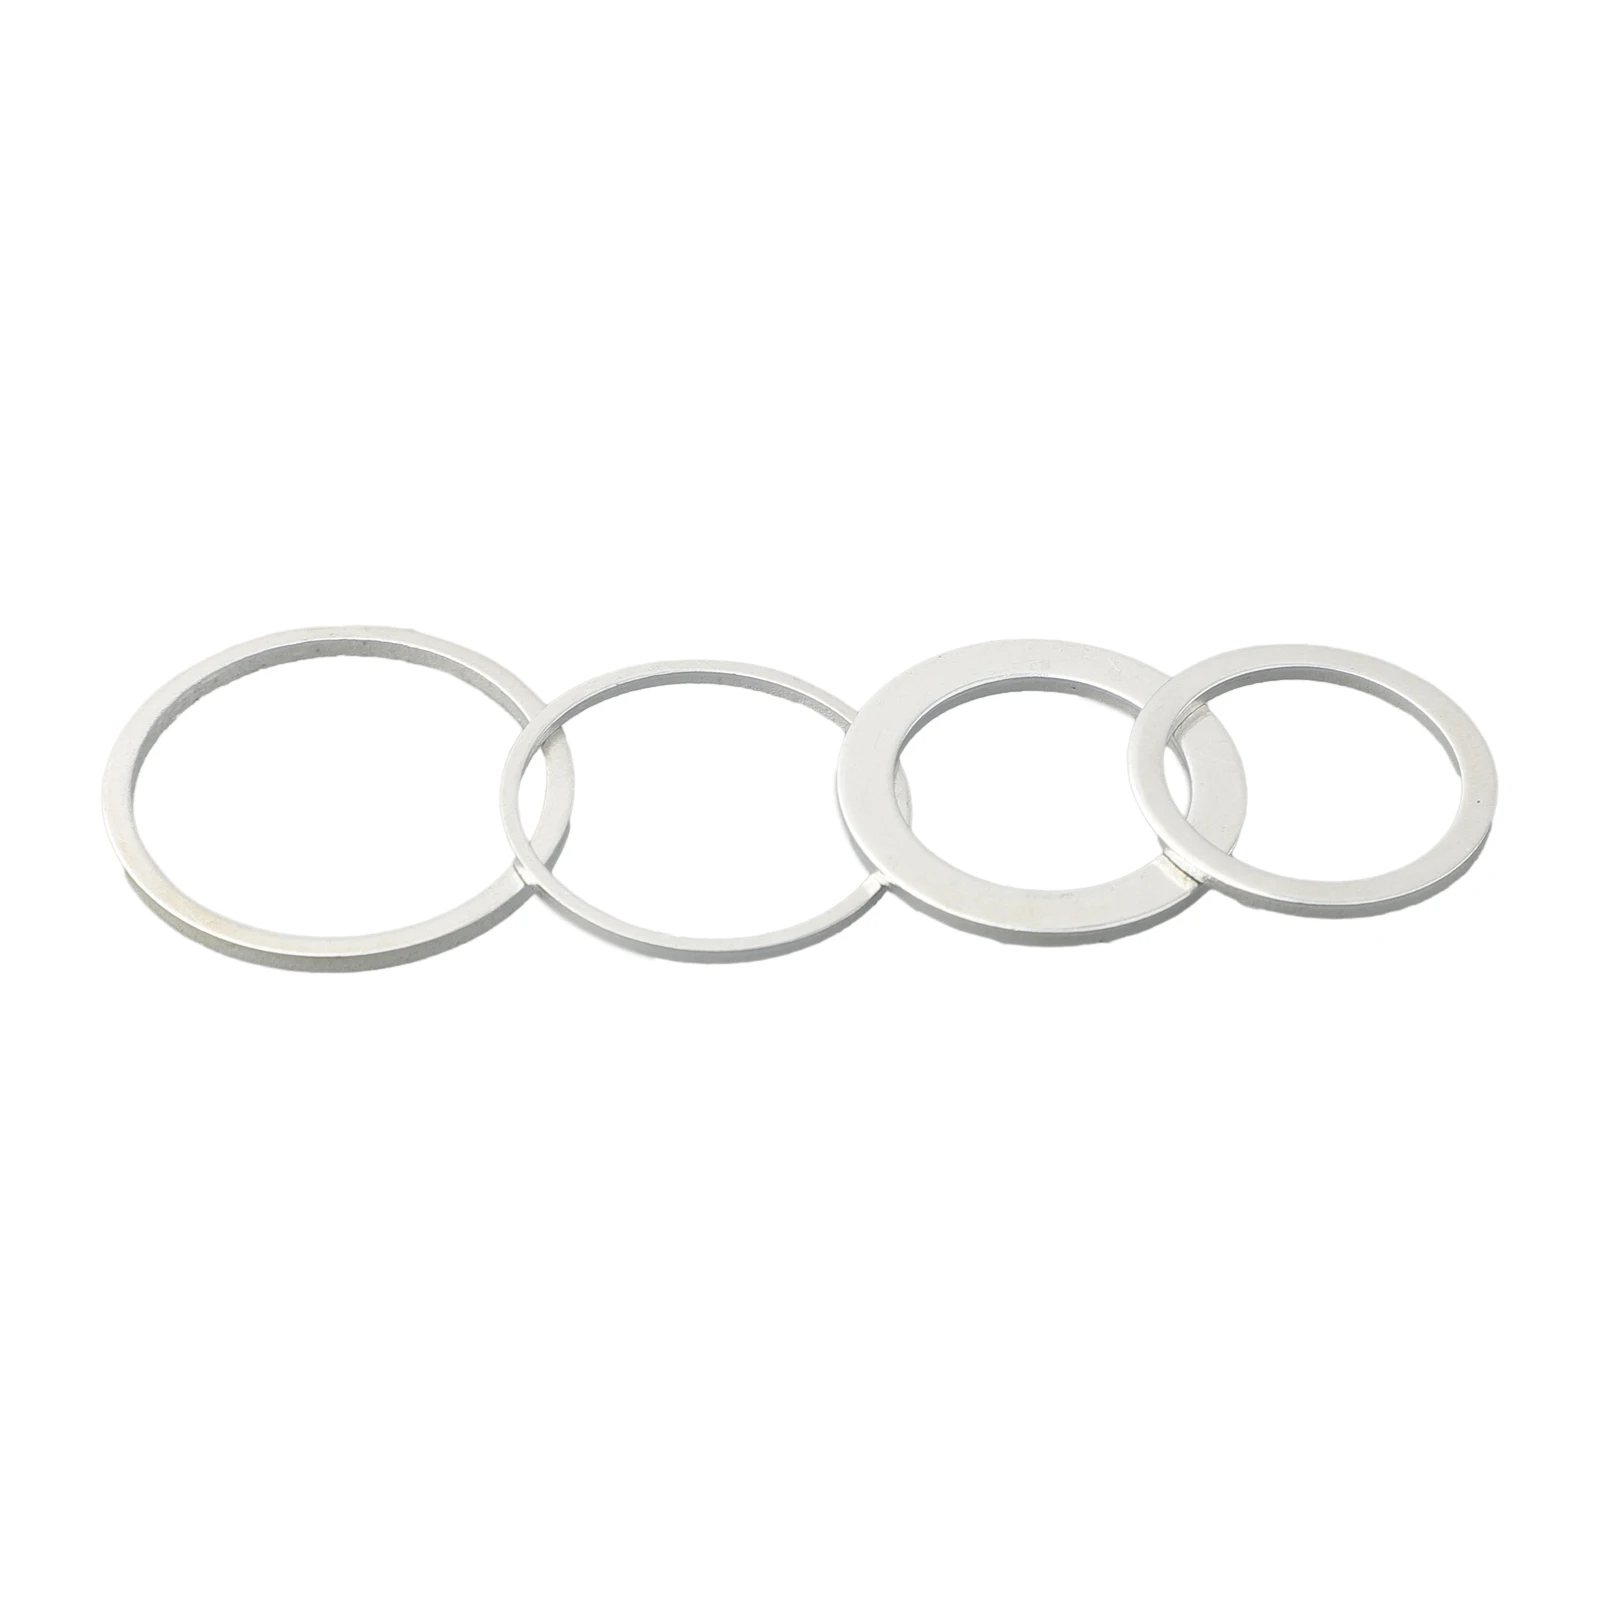 equipment set durable circular saw conversion ring internal Circular Saw Ring Reduction Ring Replacement Silver 4 Sizes 4Pcs Conversion Ring Metal Useful Brand New Durable